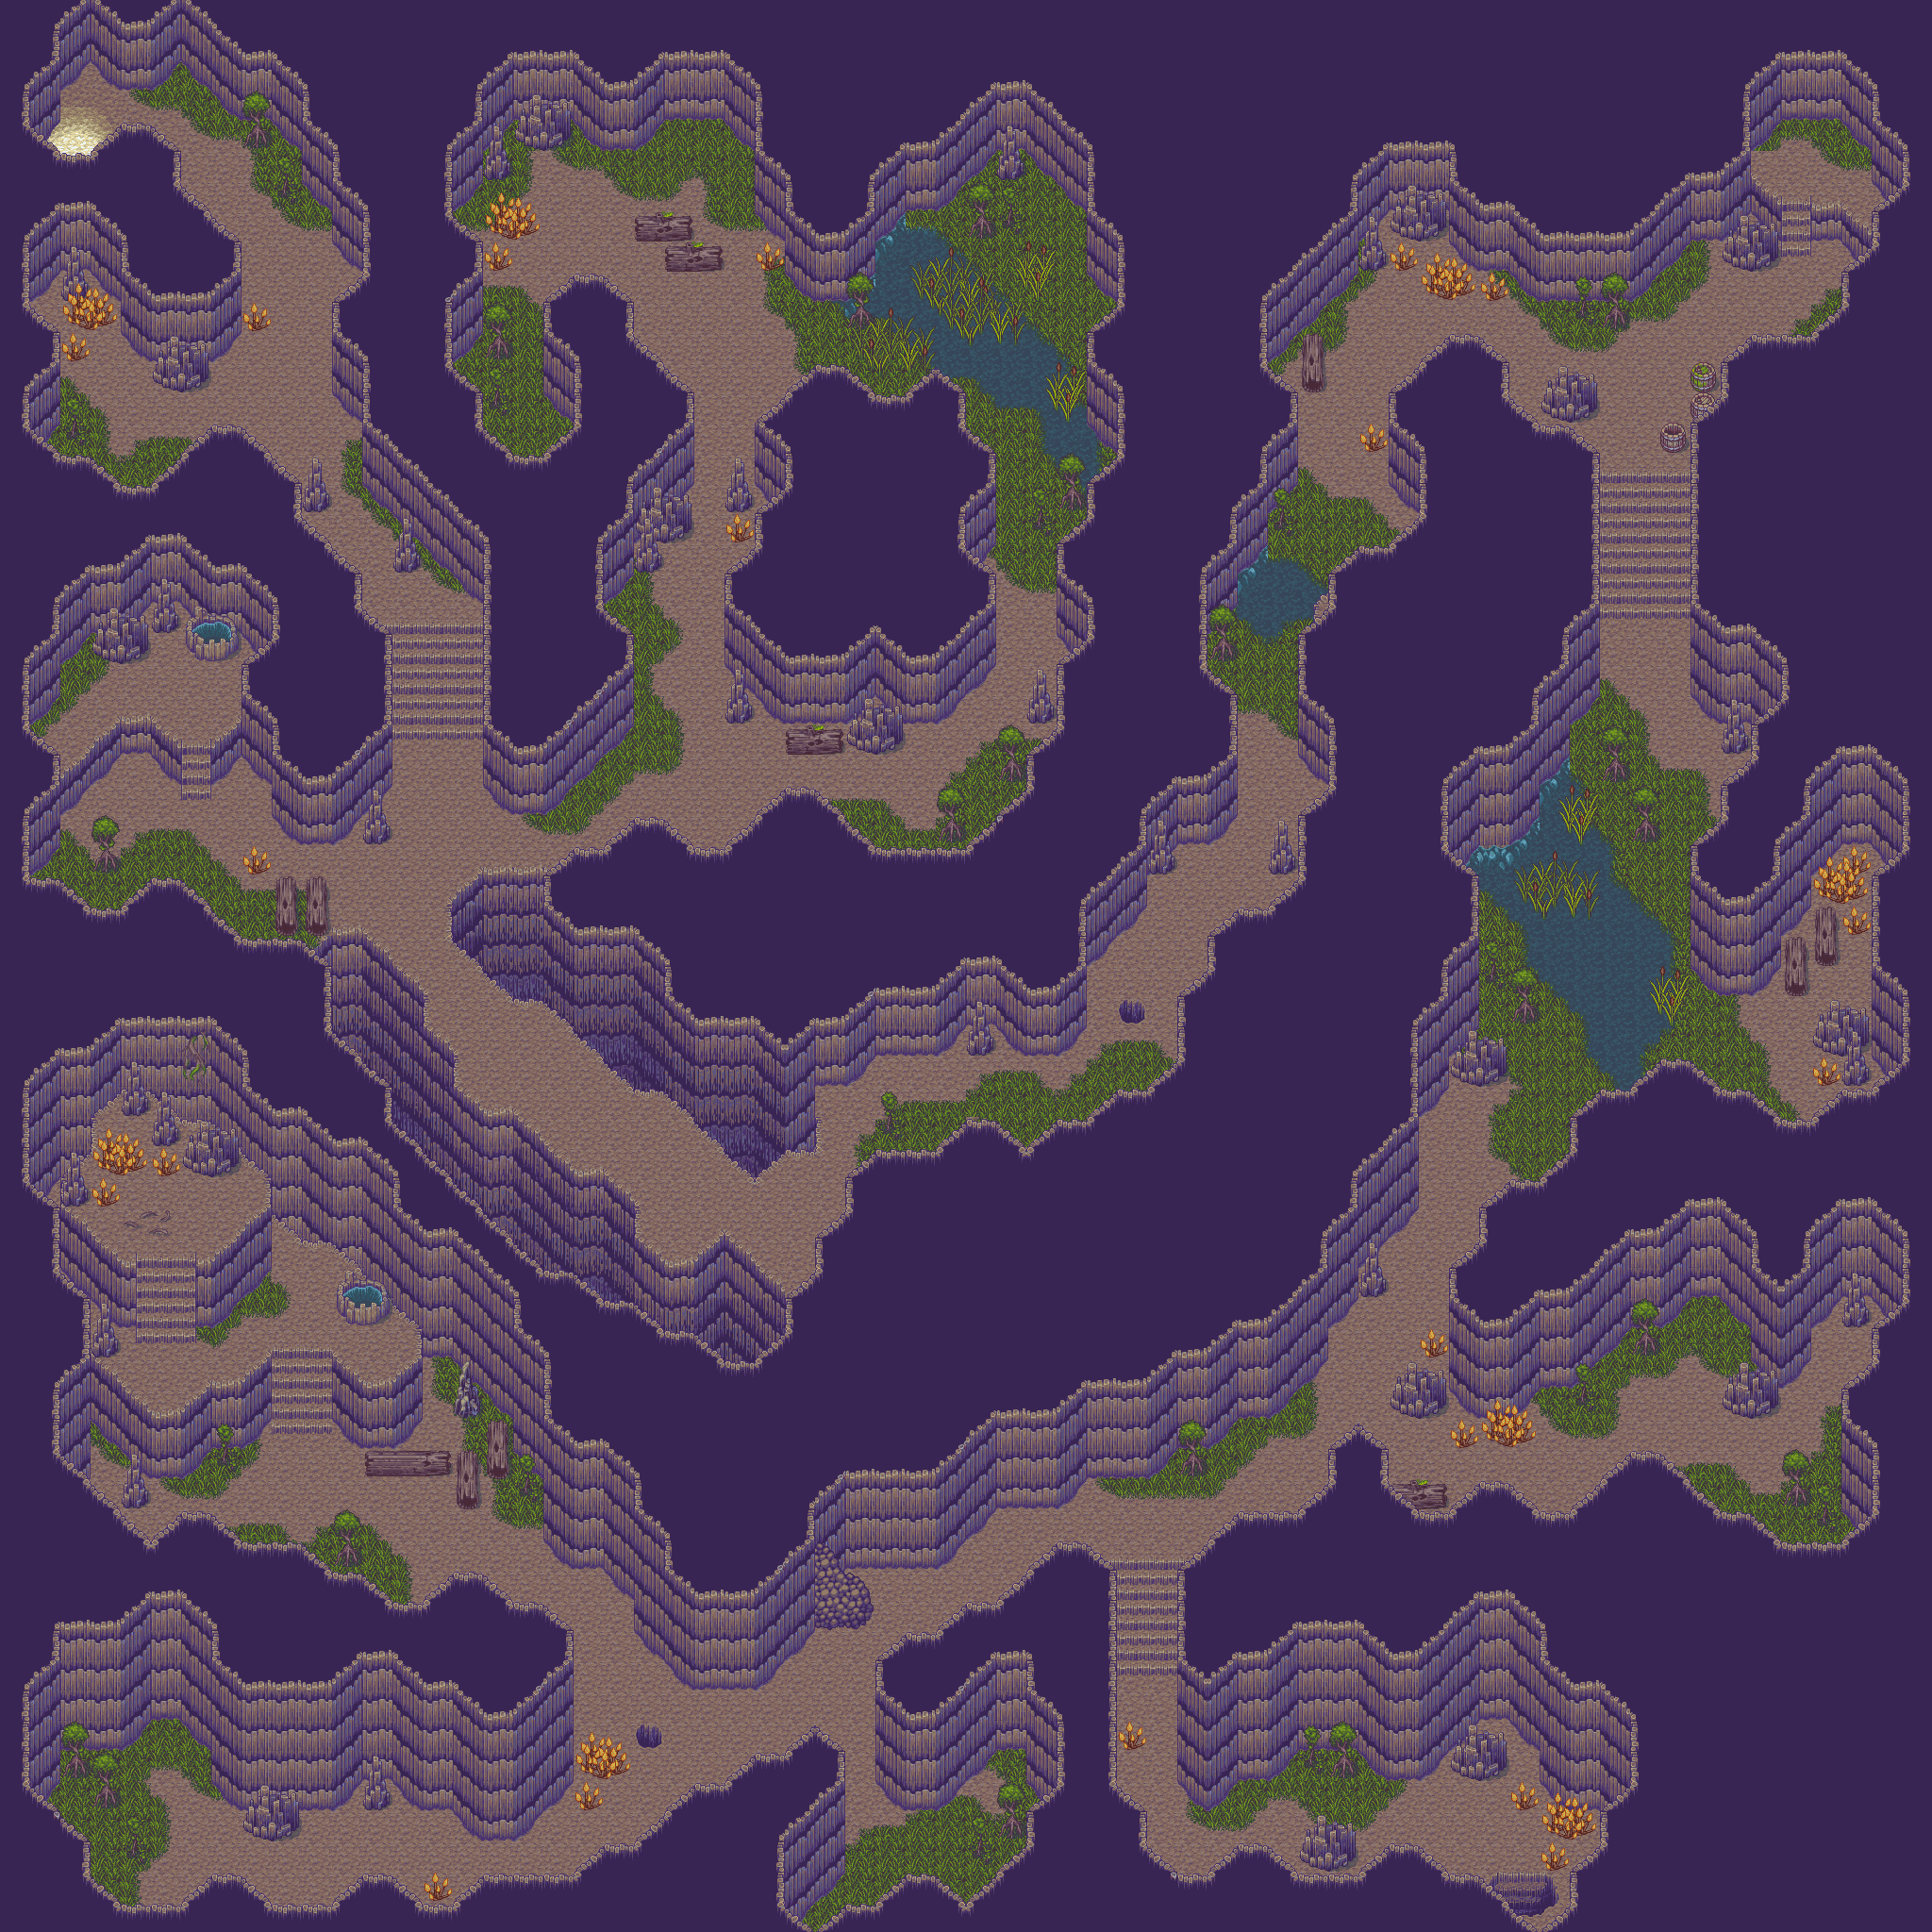 aveyond-lord-of-twilight-istir-forest-map-balanceopec